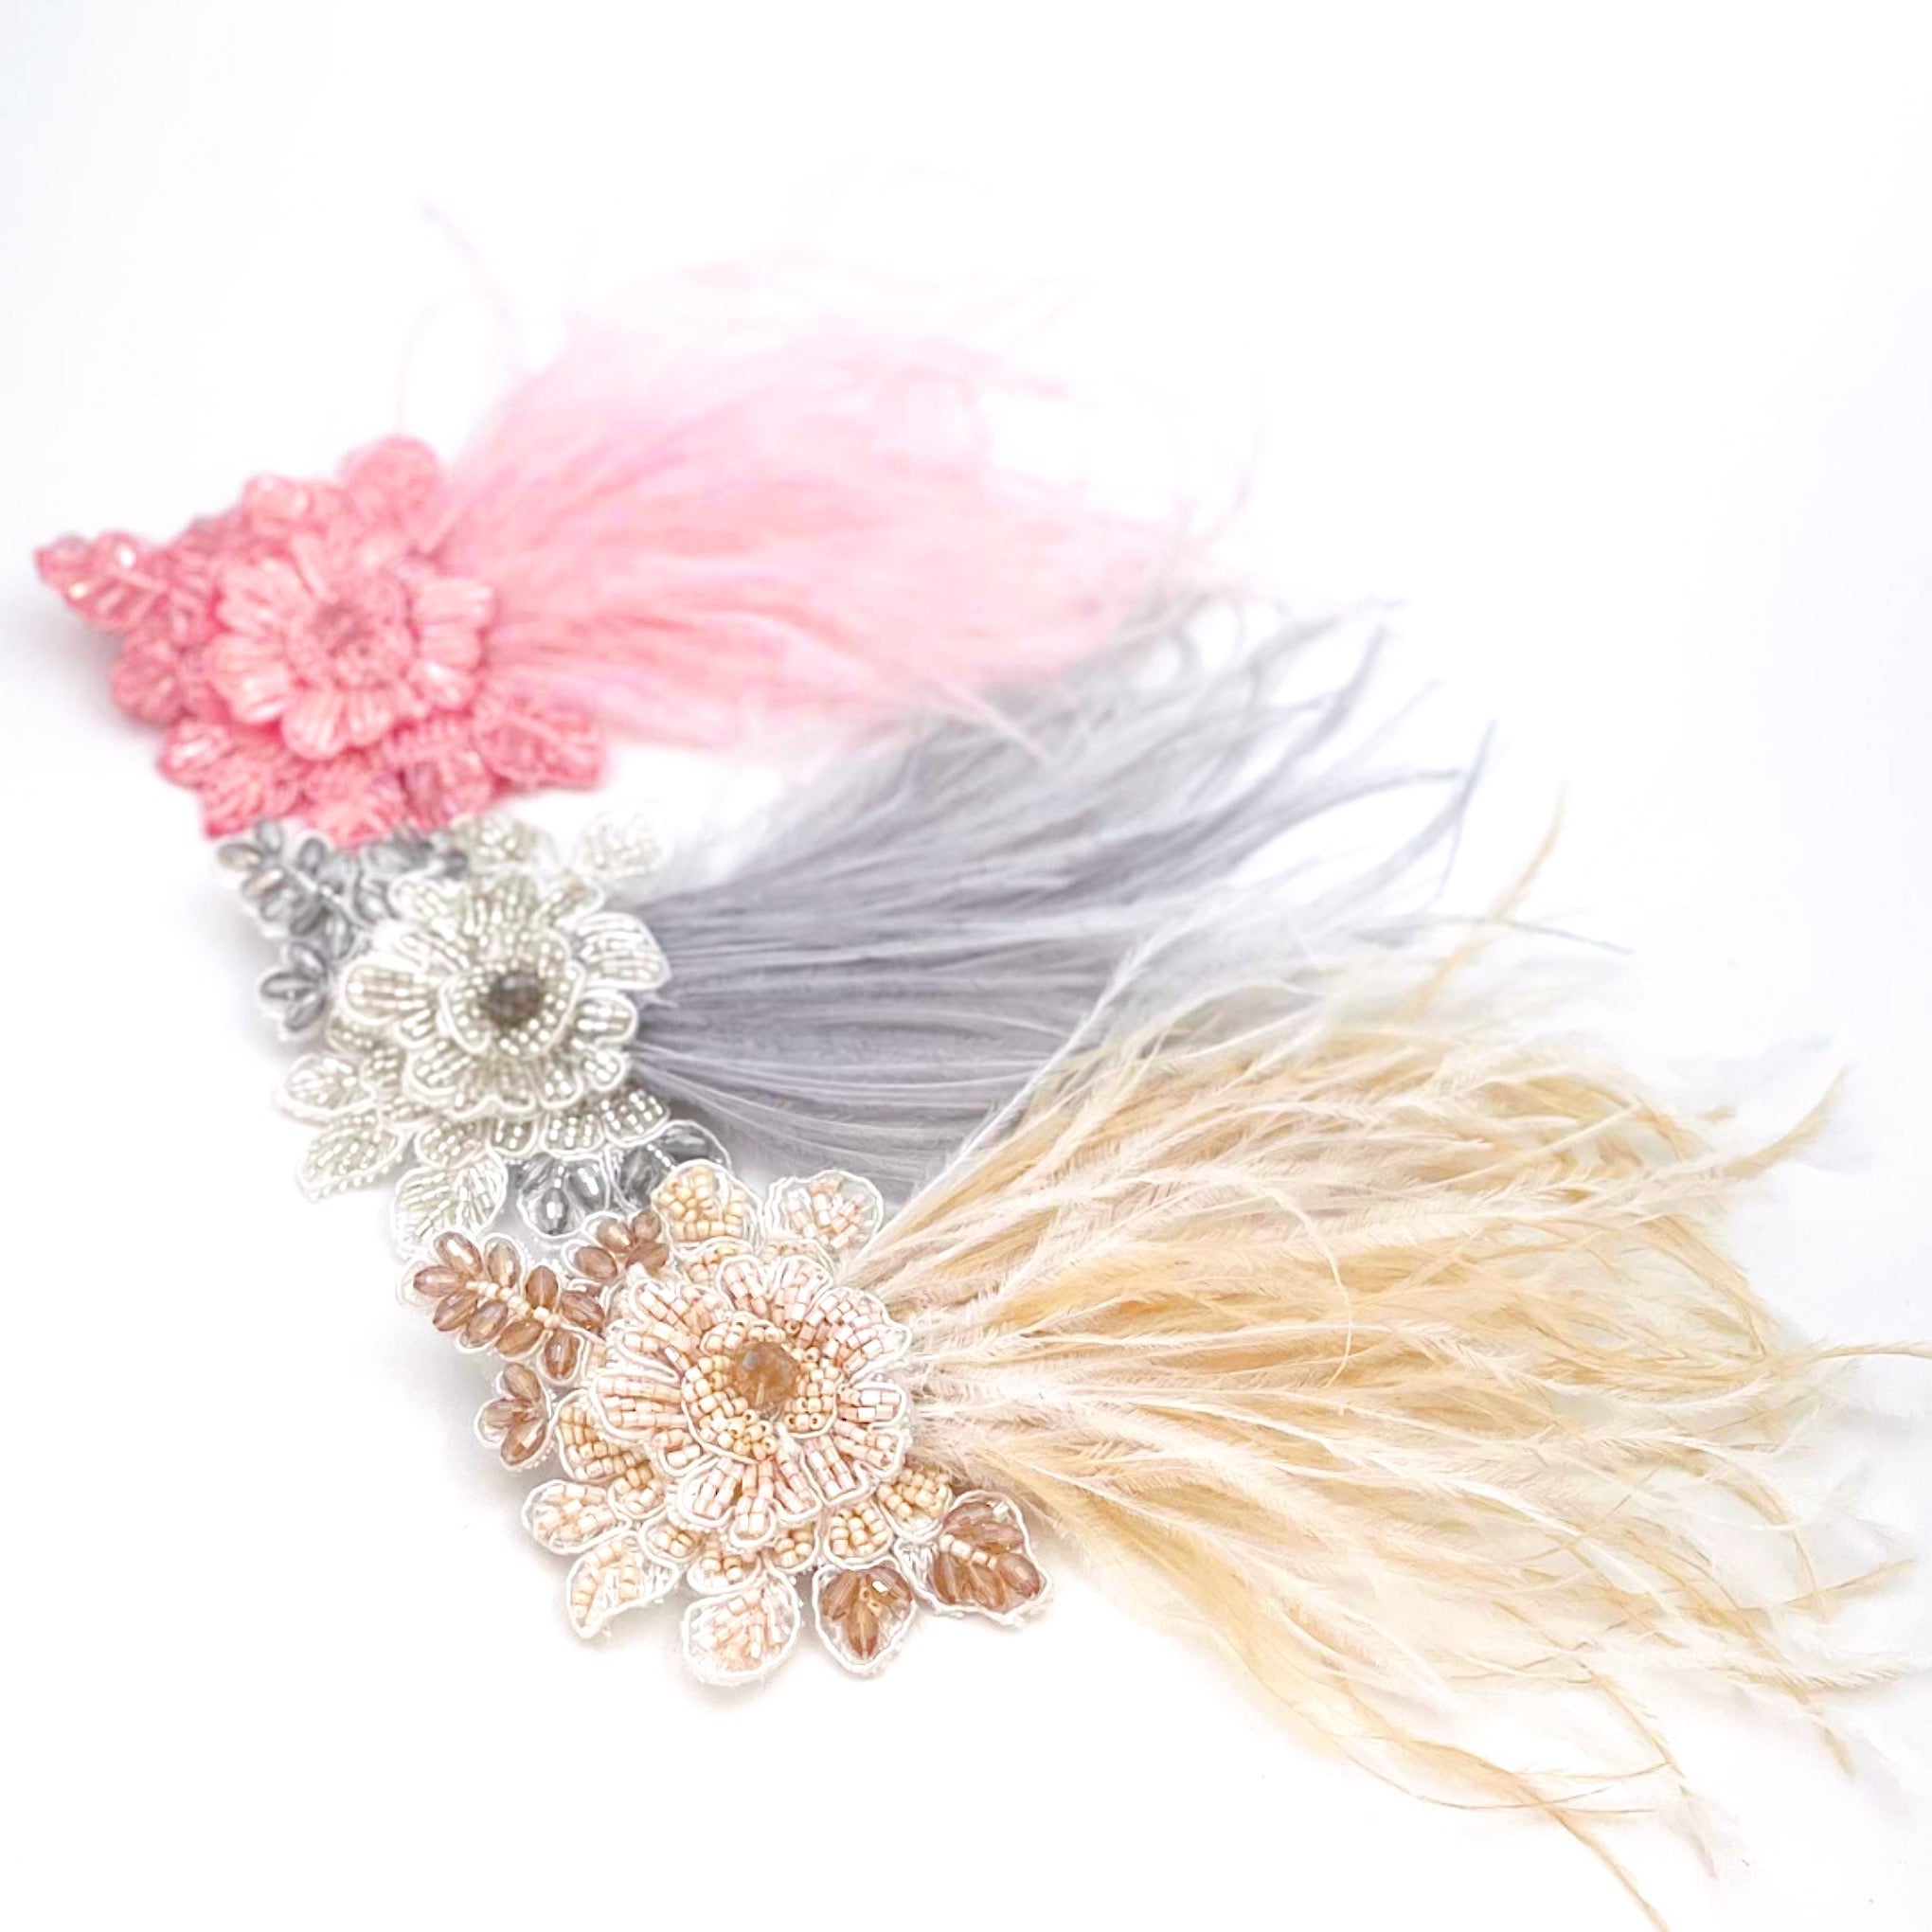 Designer Childrens Hair Accessories by Sienna Likes to Party - fascinator hair clips